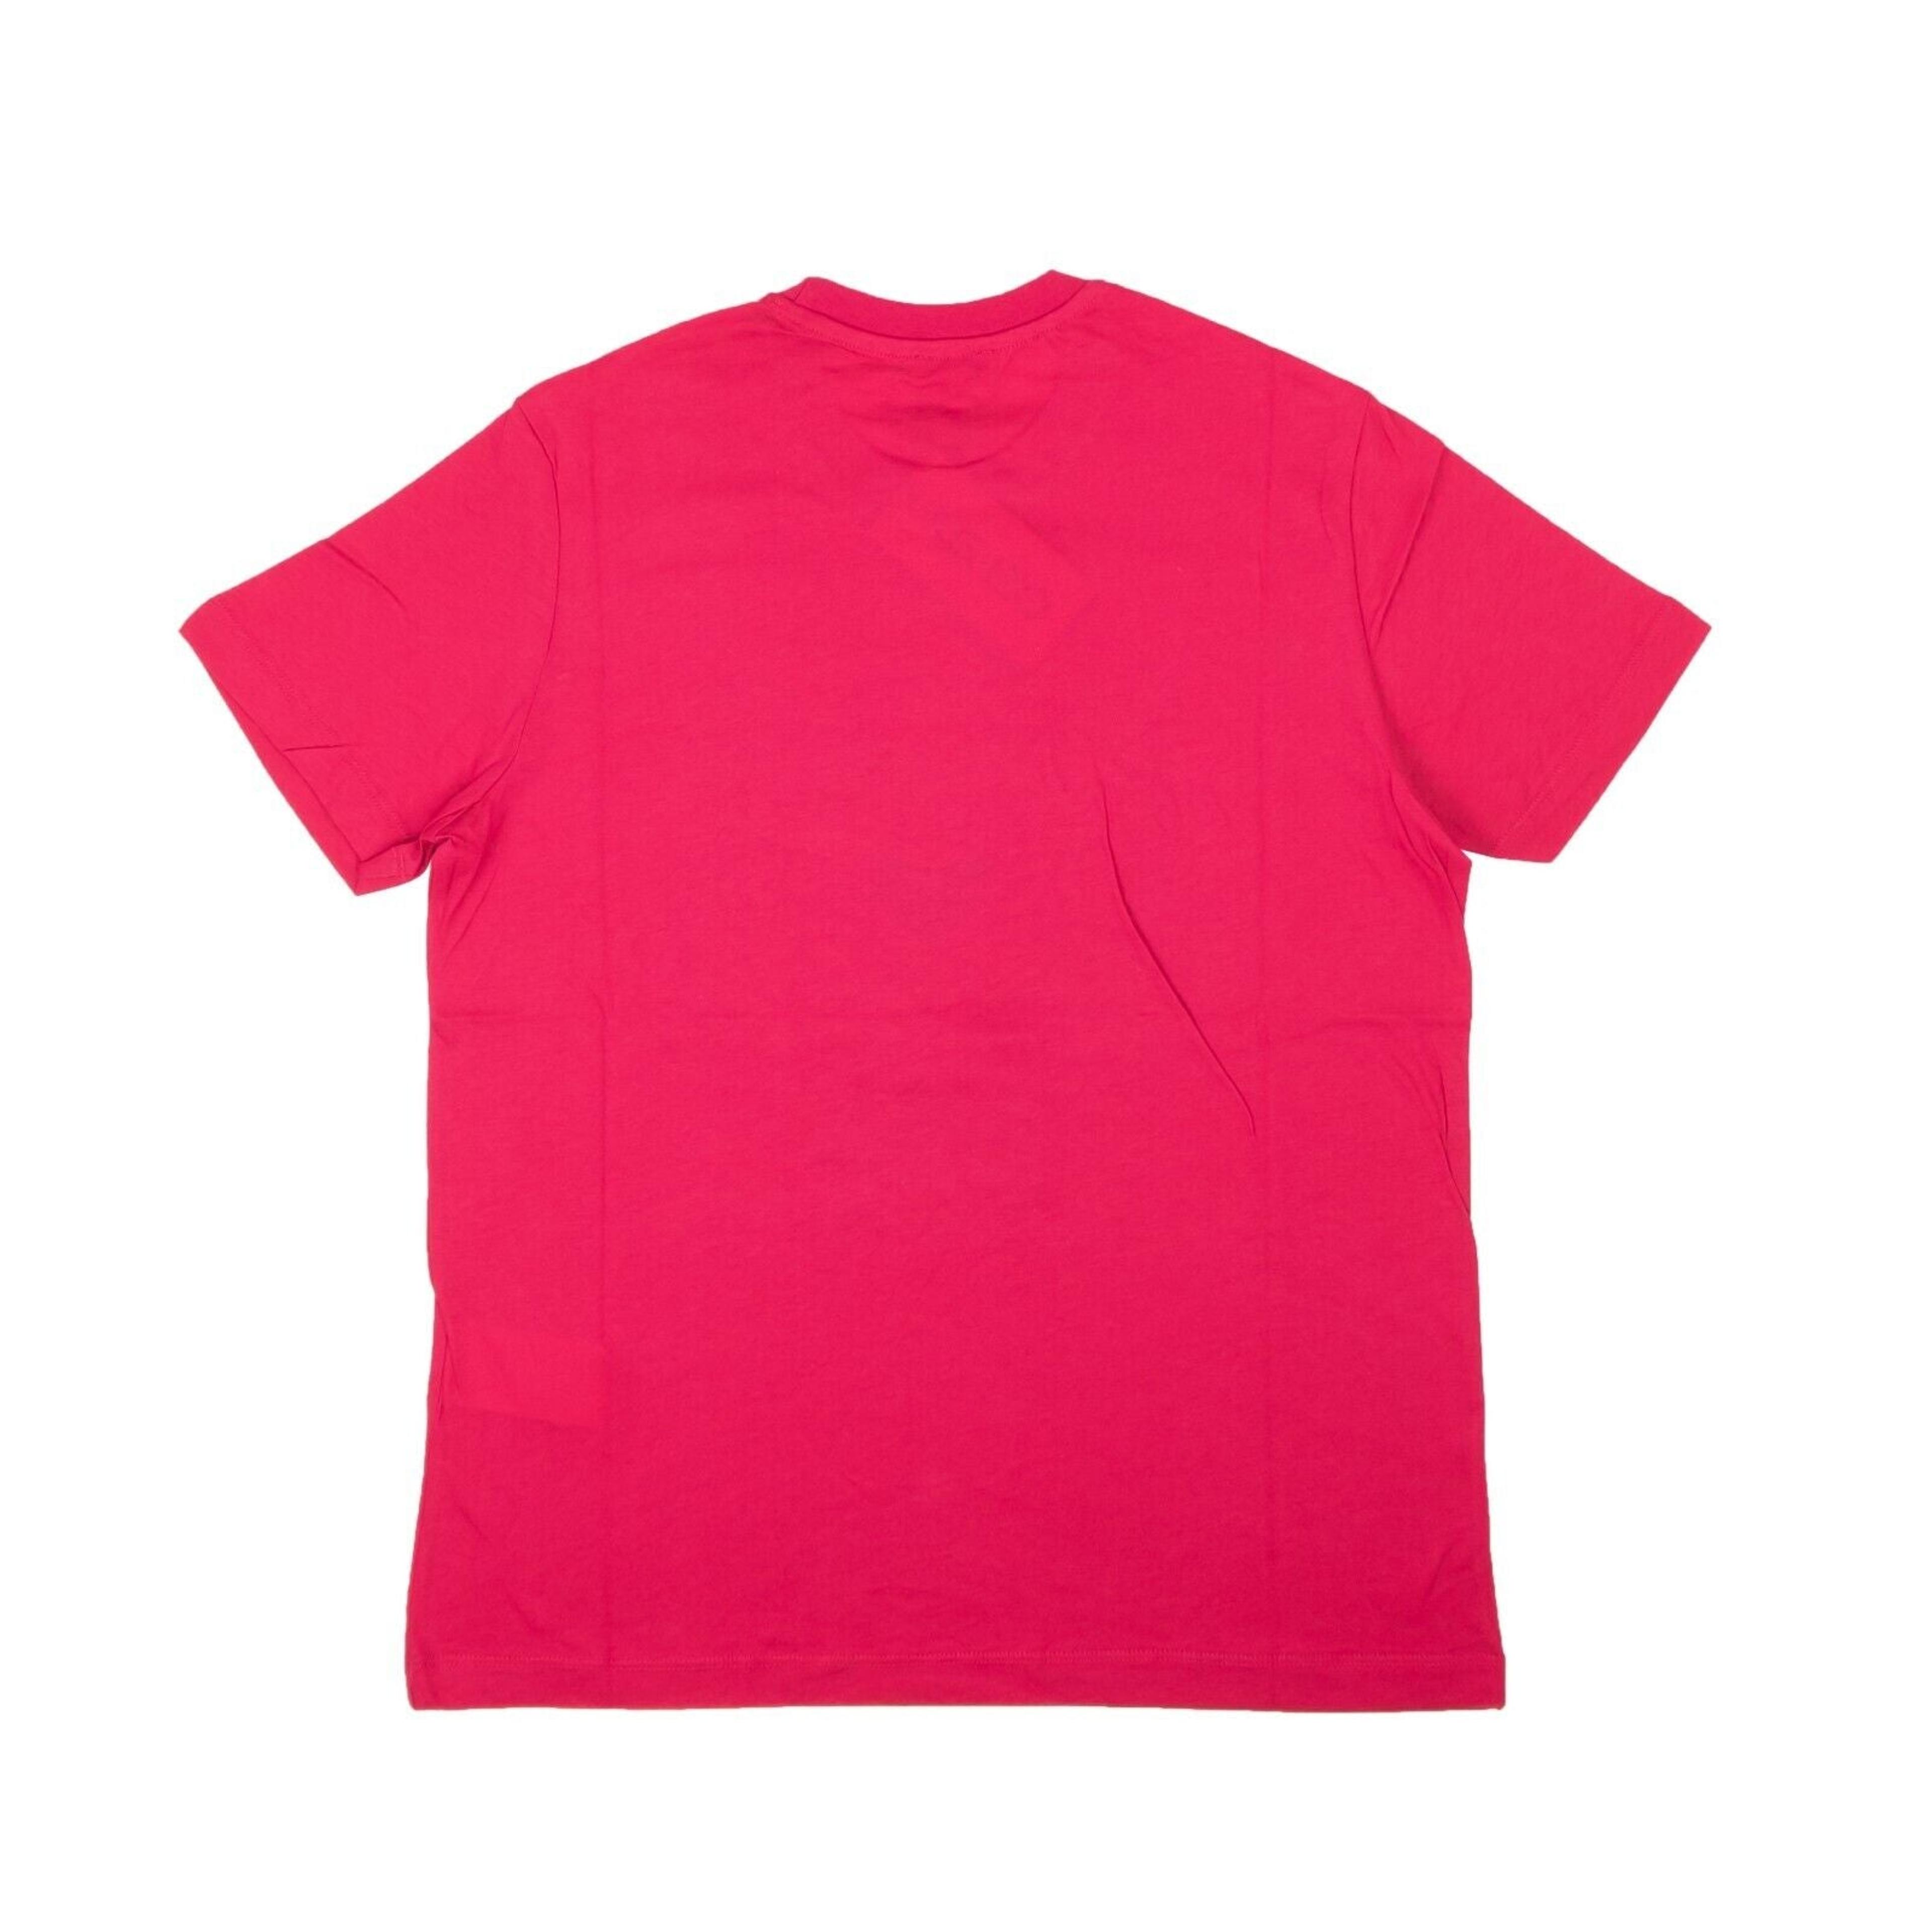 Alternate View 2 of Kenzo Classic Tiger T-Shirt - Pink